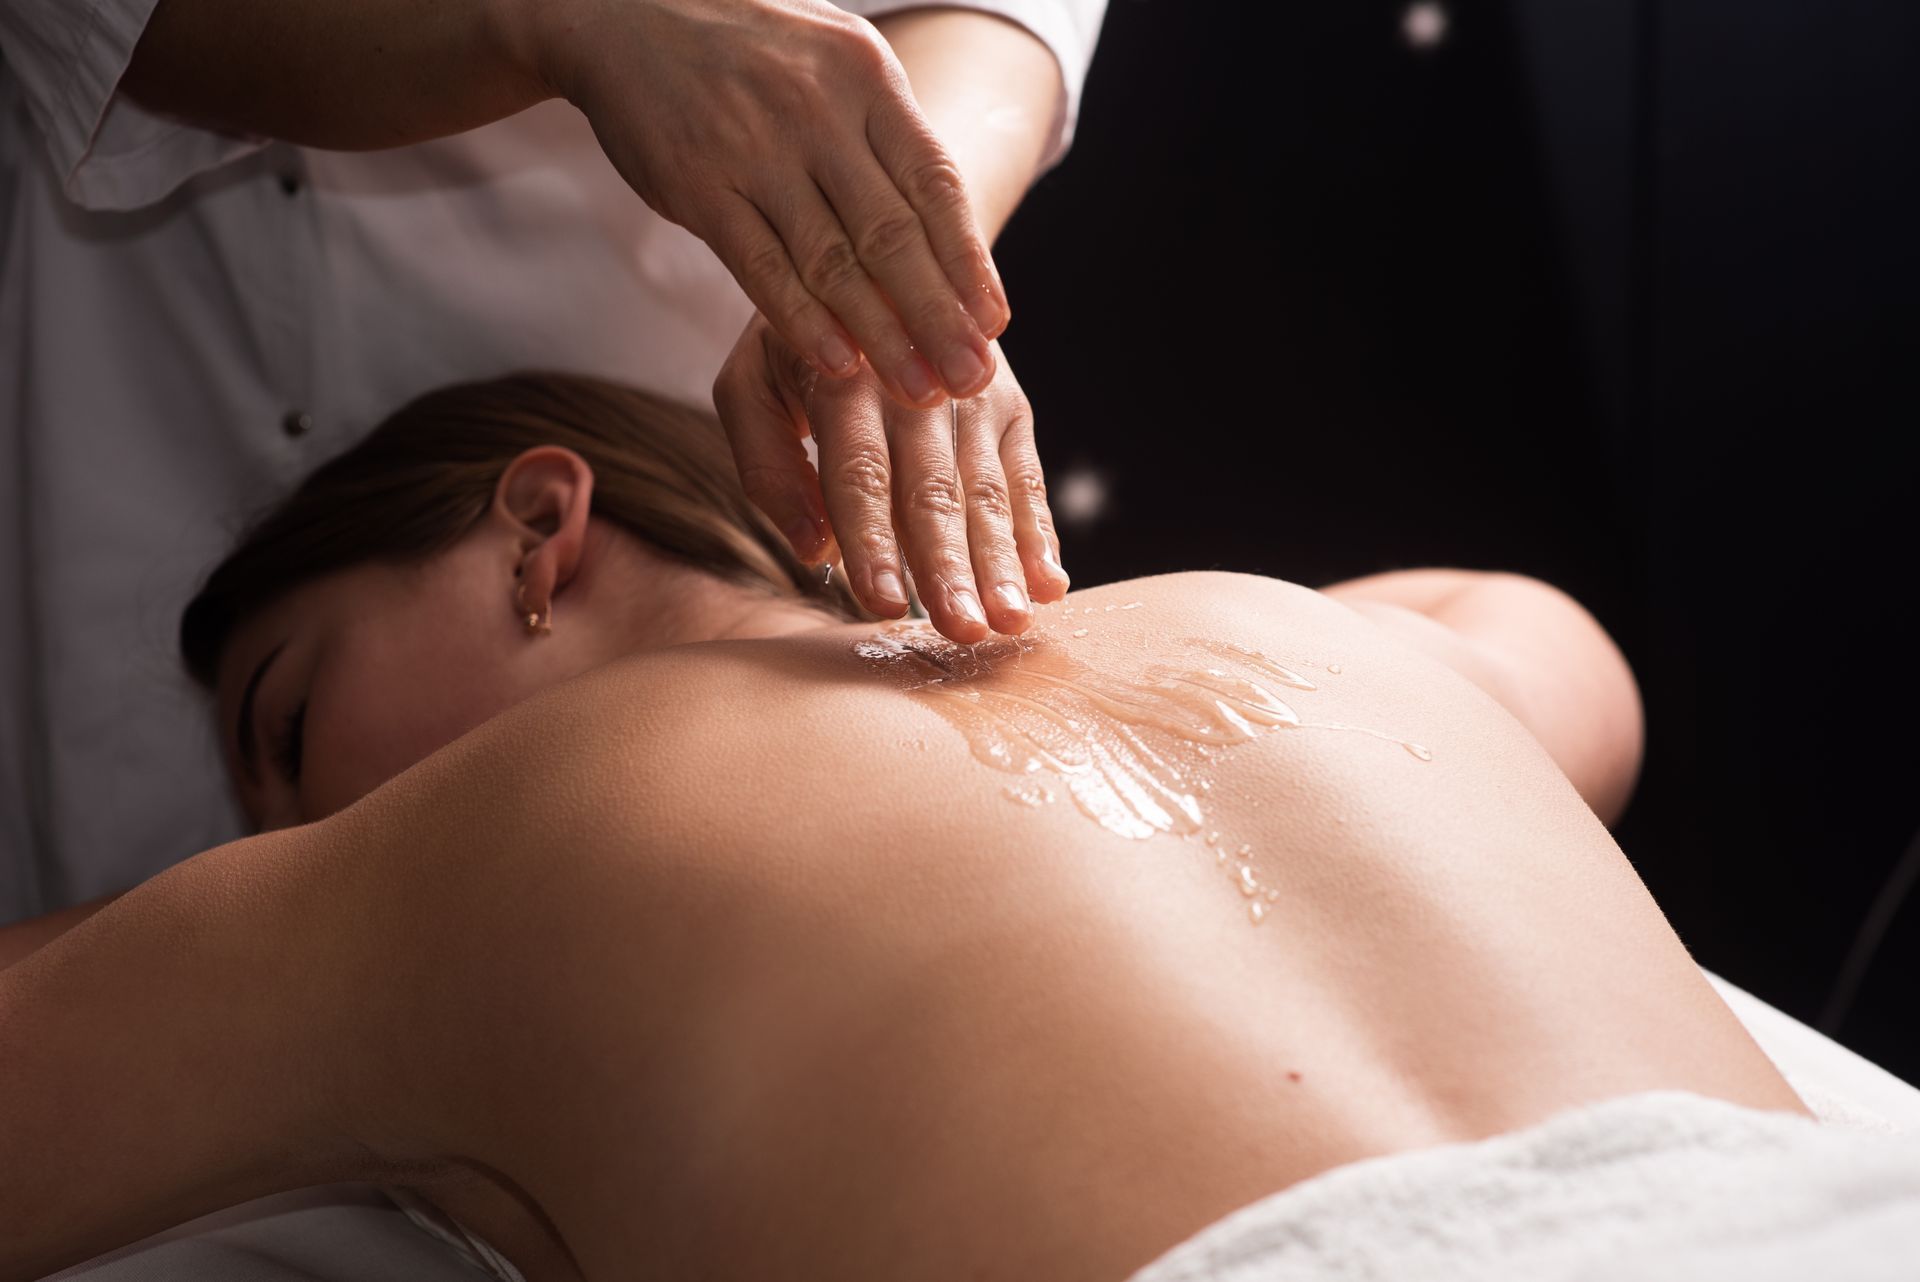 A woman is getting a massage on her back at a spa.